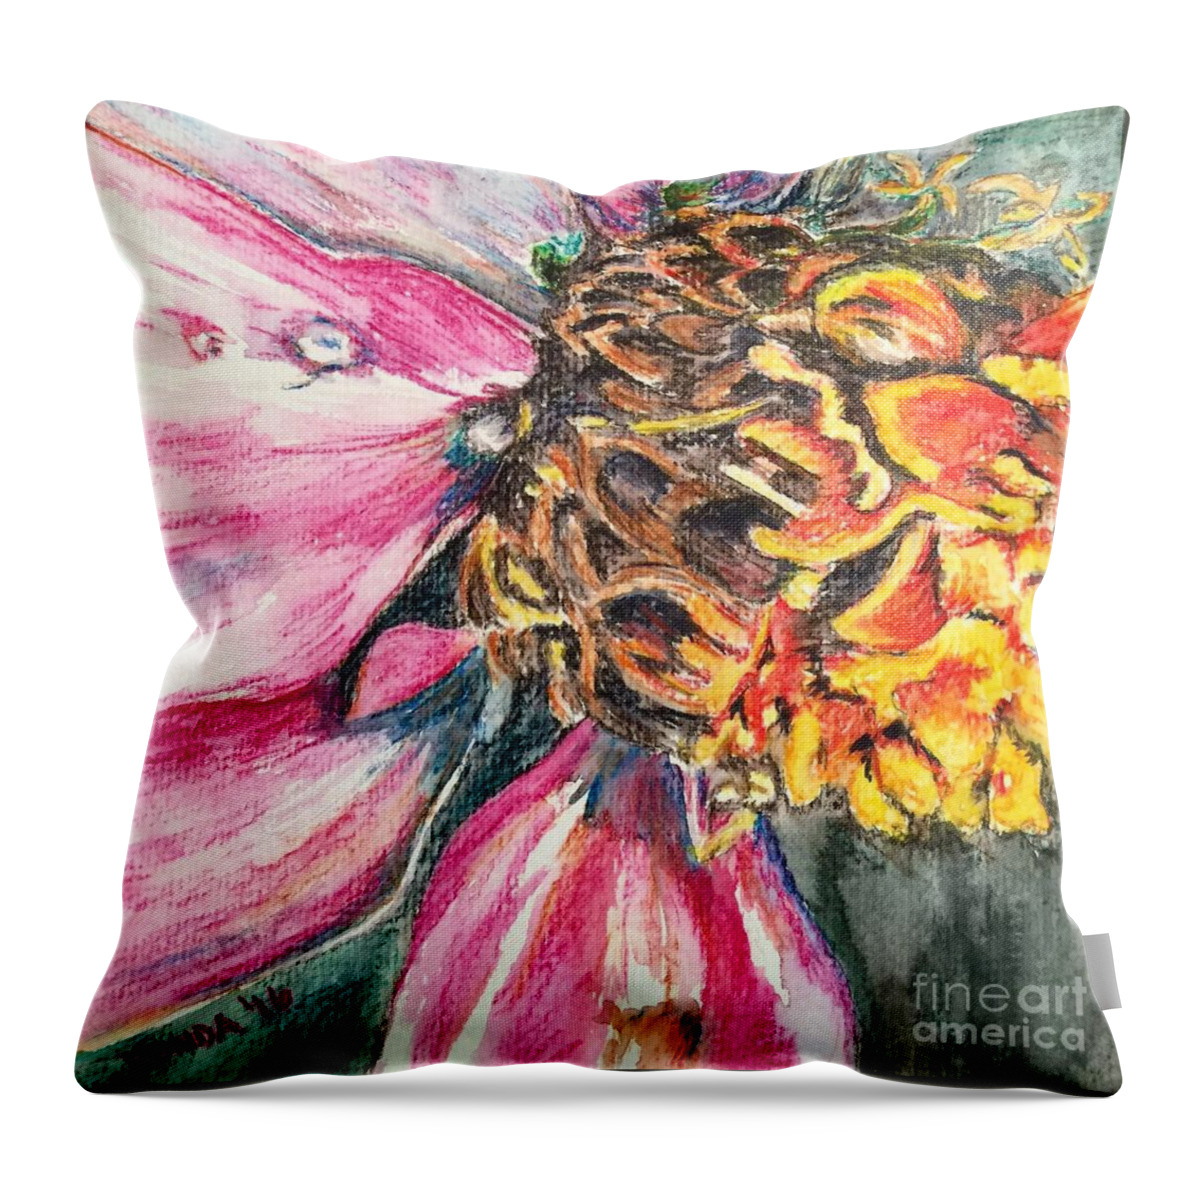 Macro Throw Pillow featuring the drawing Crazy Top by Vonda Lawson-Rosa